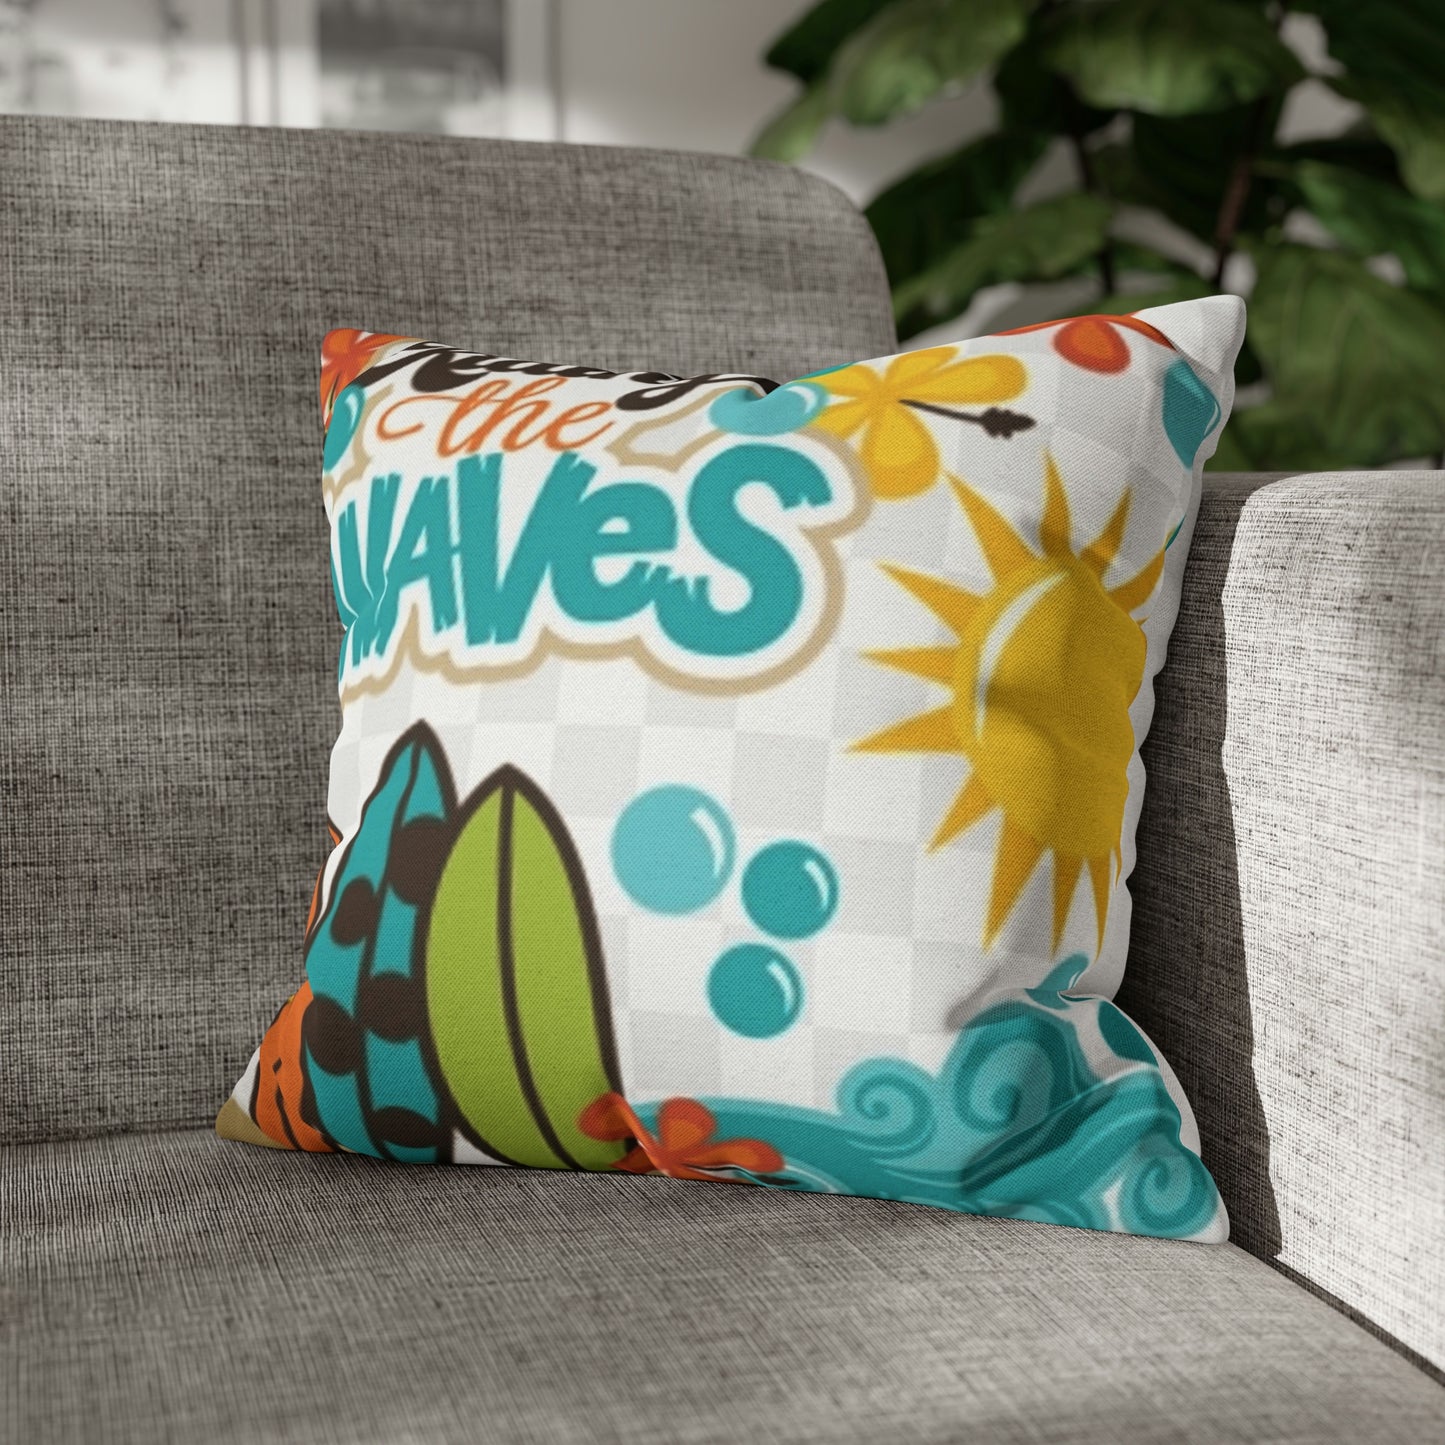 White Riding the wave Polyester Square Pillow | Spun Polyester Square Pillow Case | Surfboard | flower Décor pillow